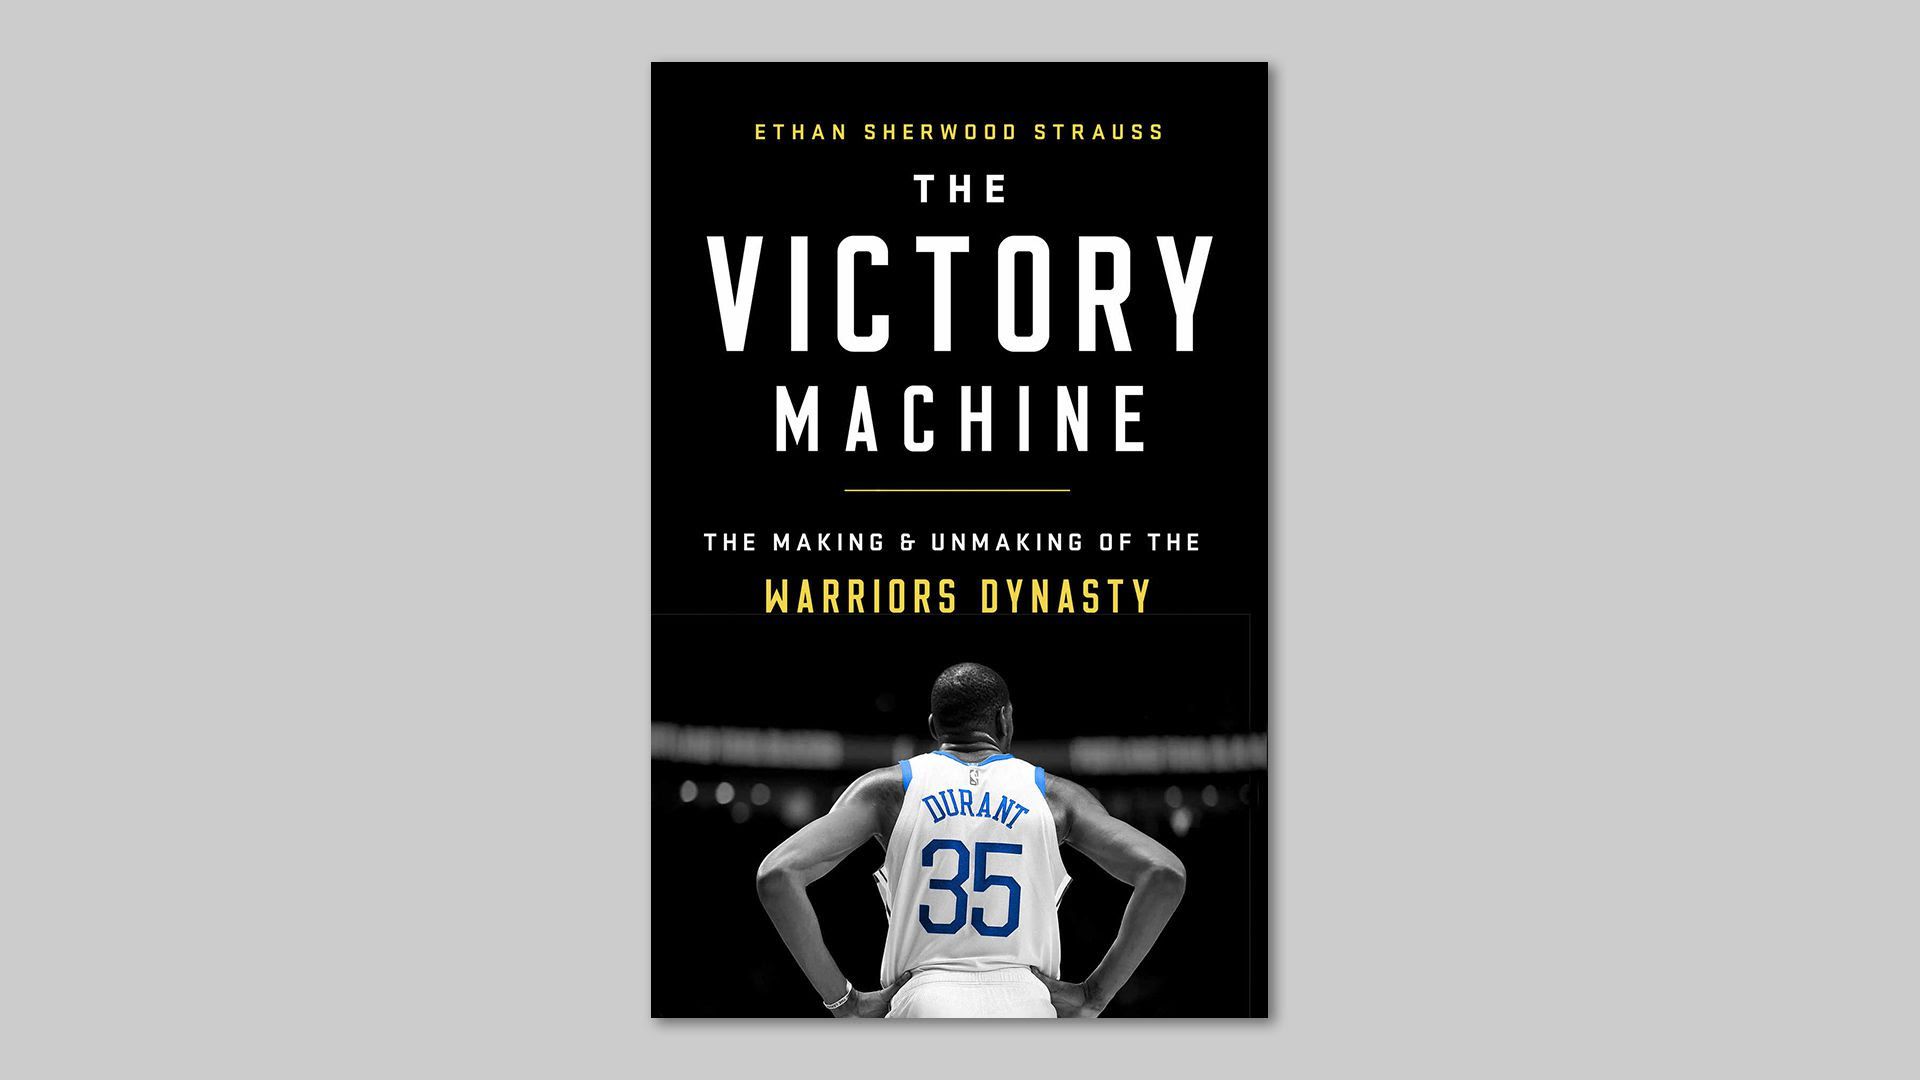 The cover of the book "Victory Machine."